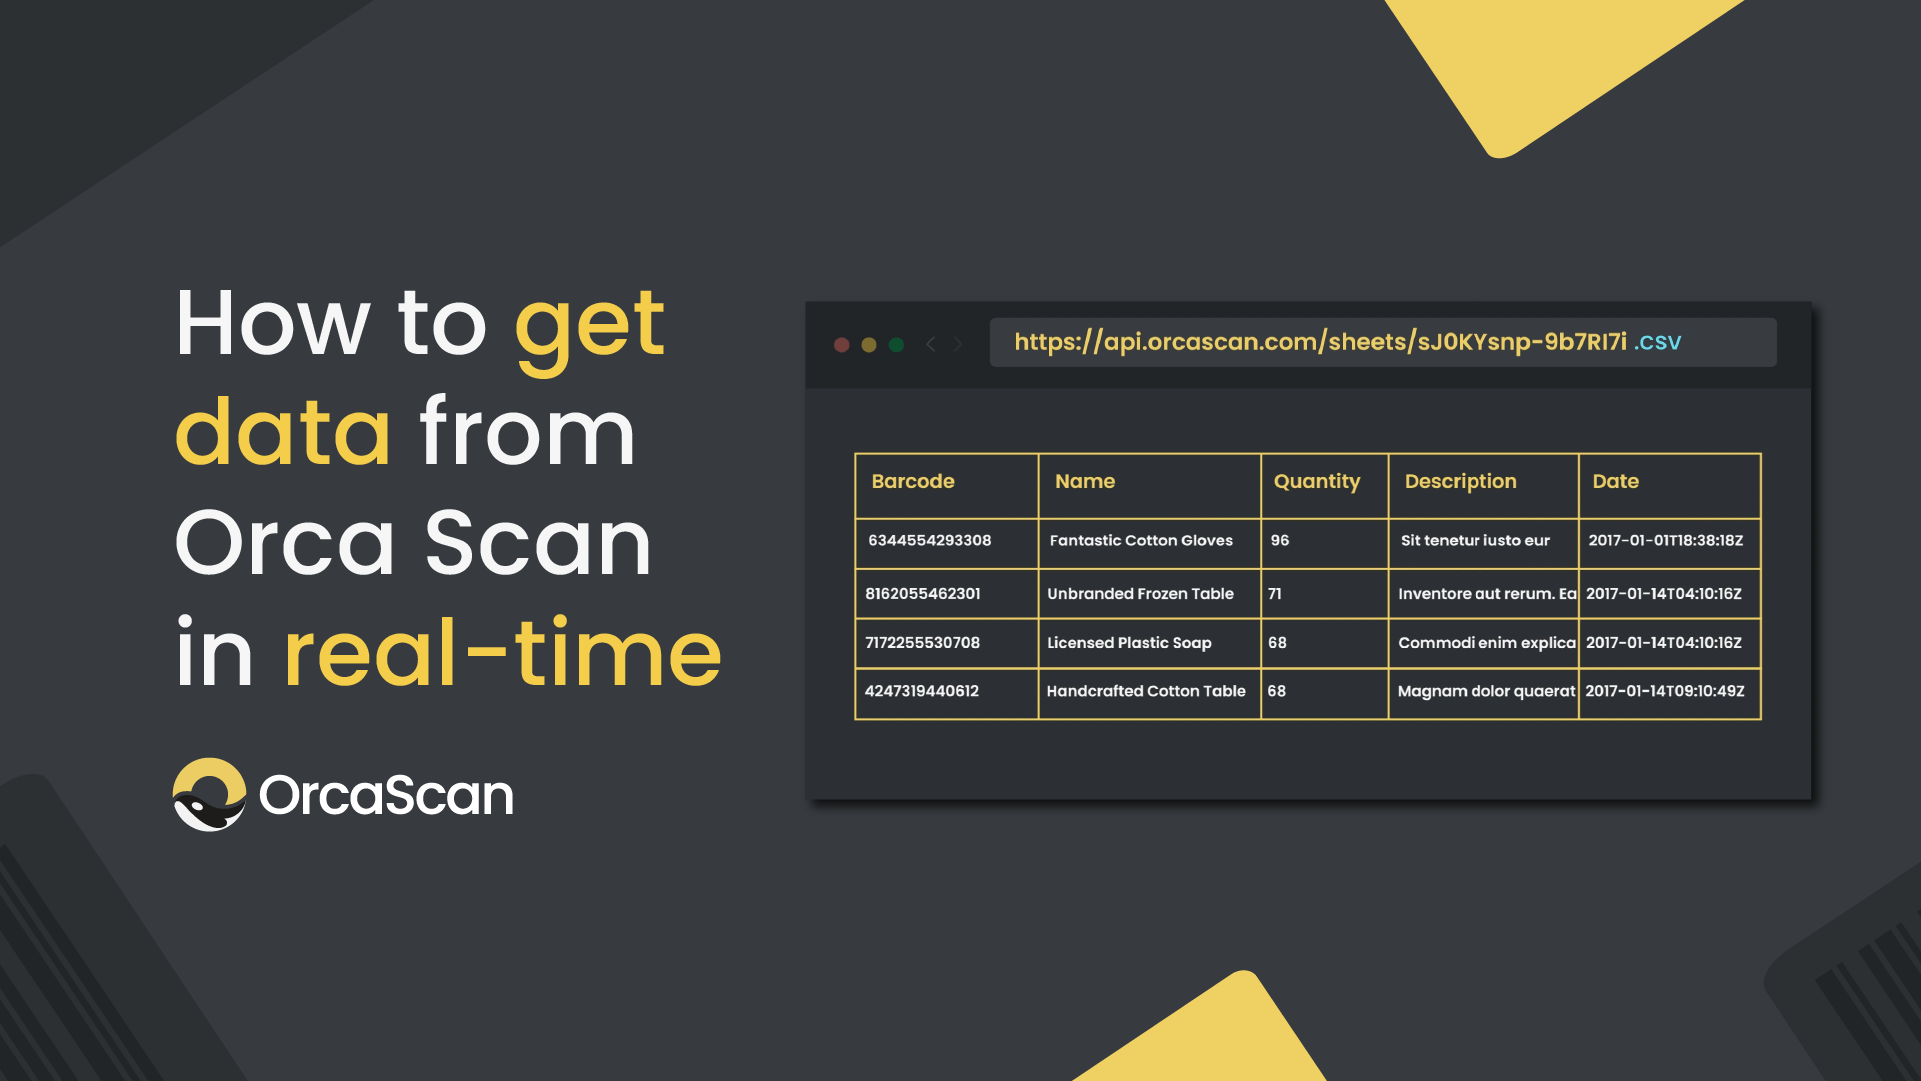 How to get data from Orca Scan in real-time